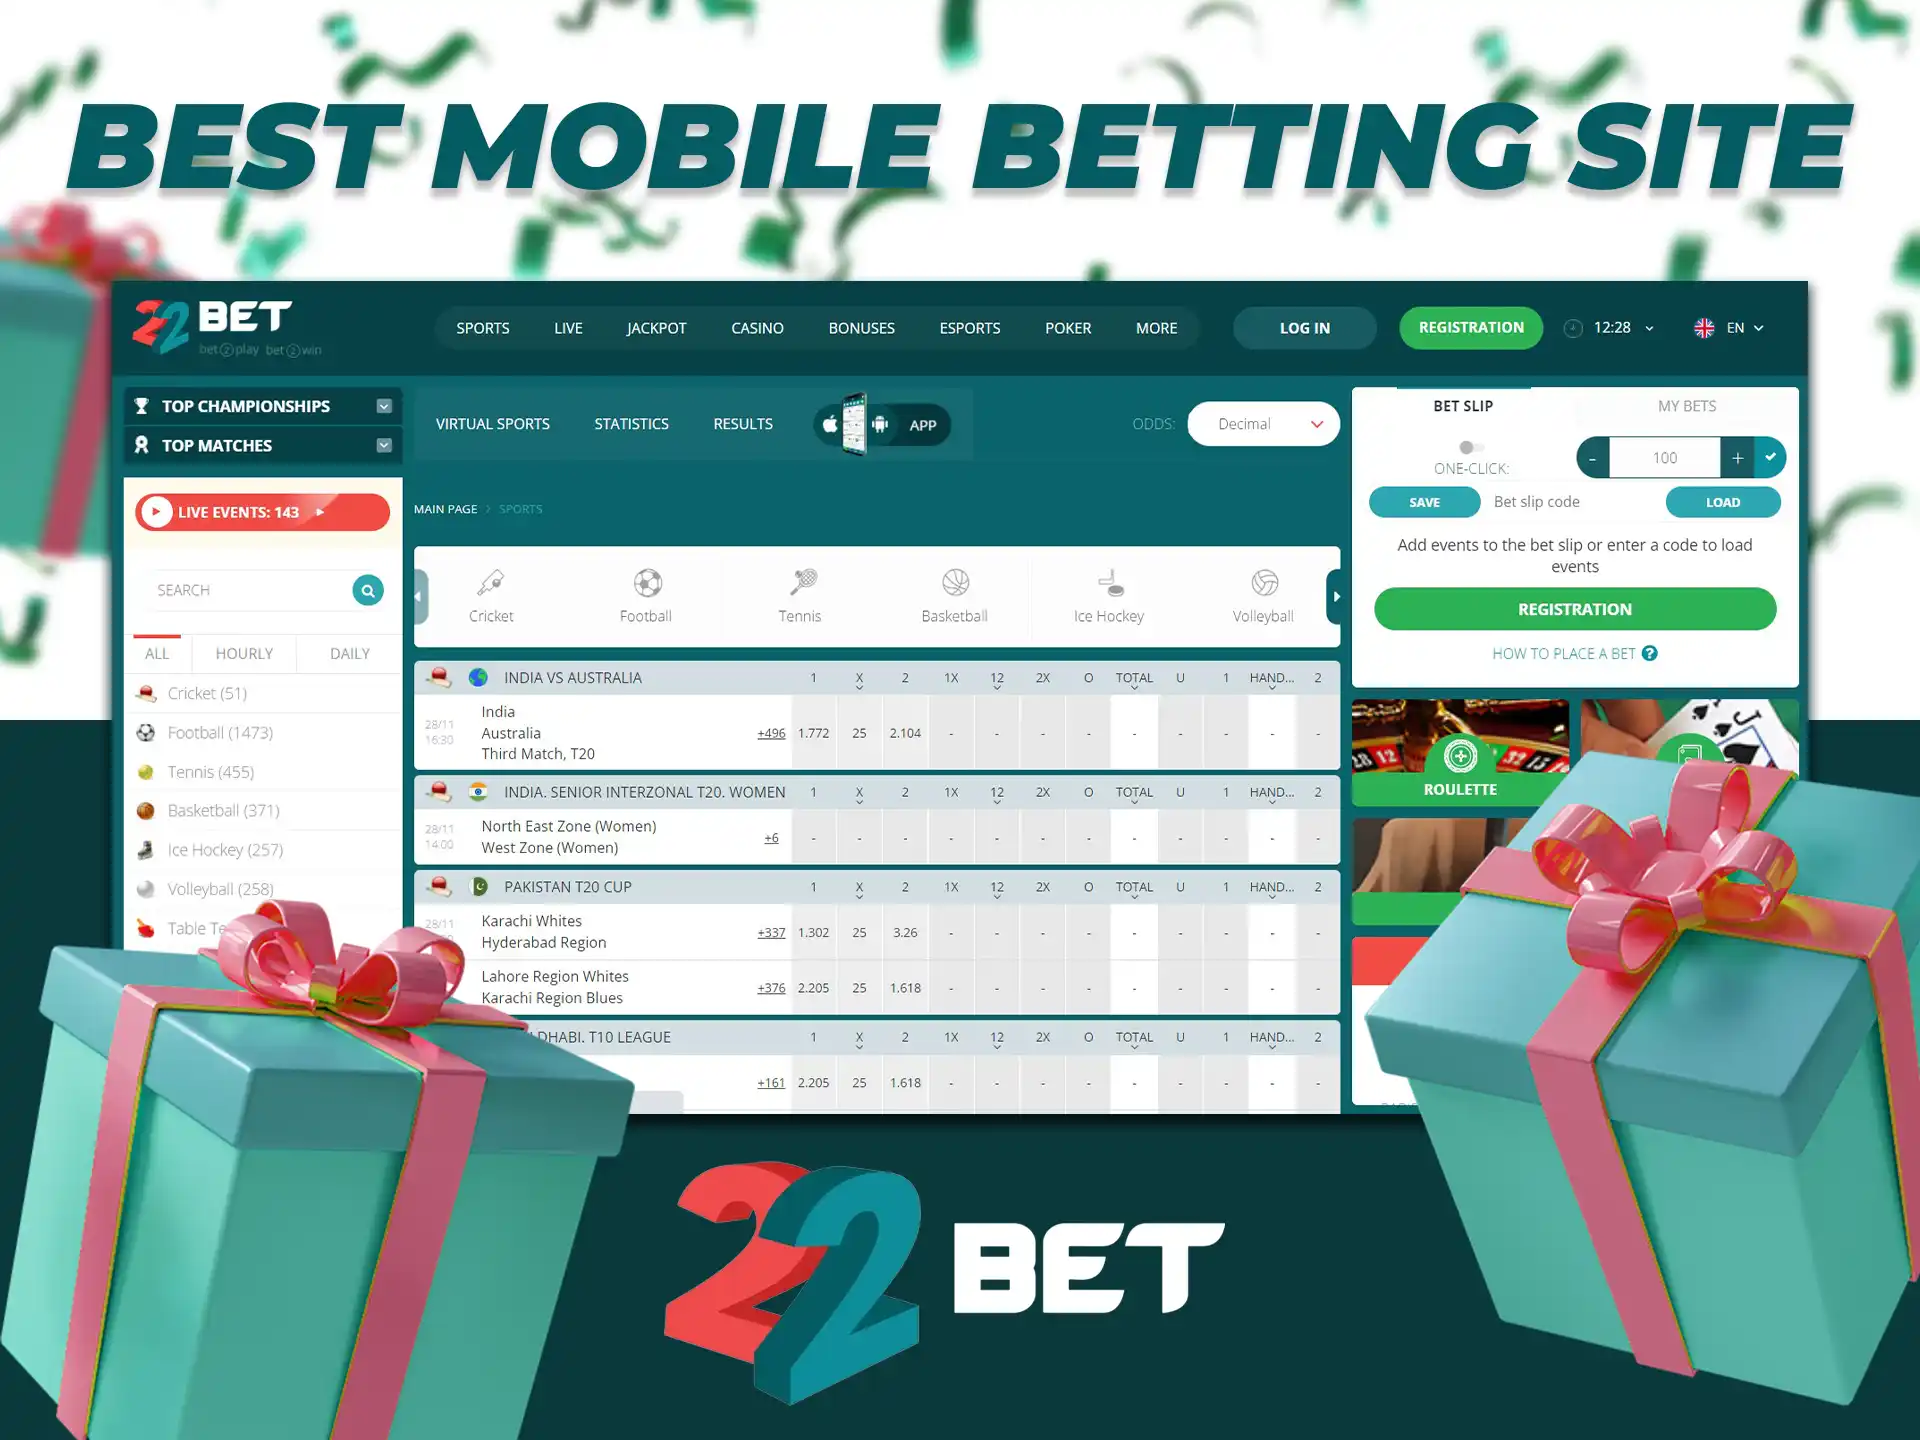 Betting from a mobile device is most convenient from the 22Bet website.